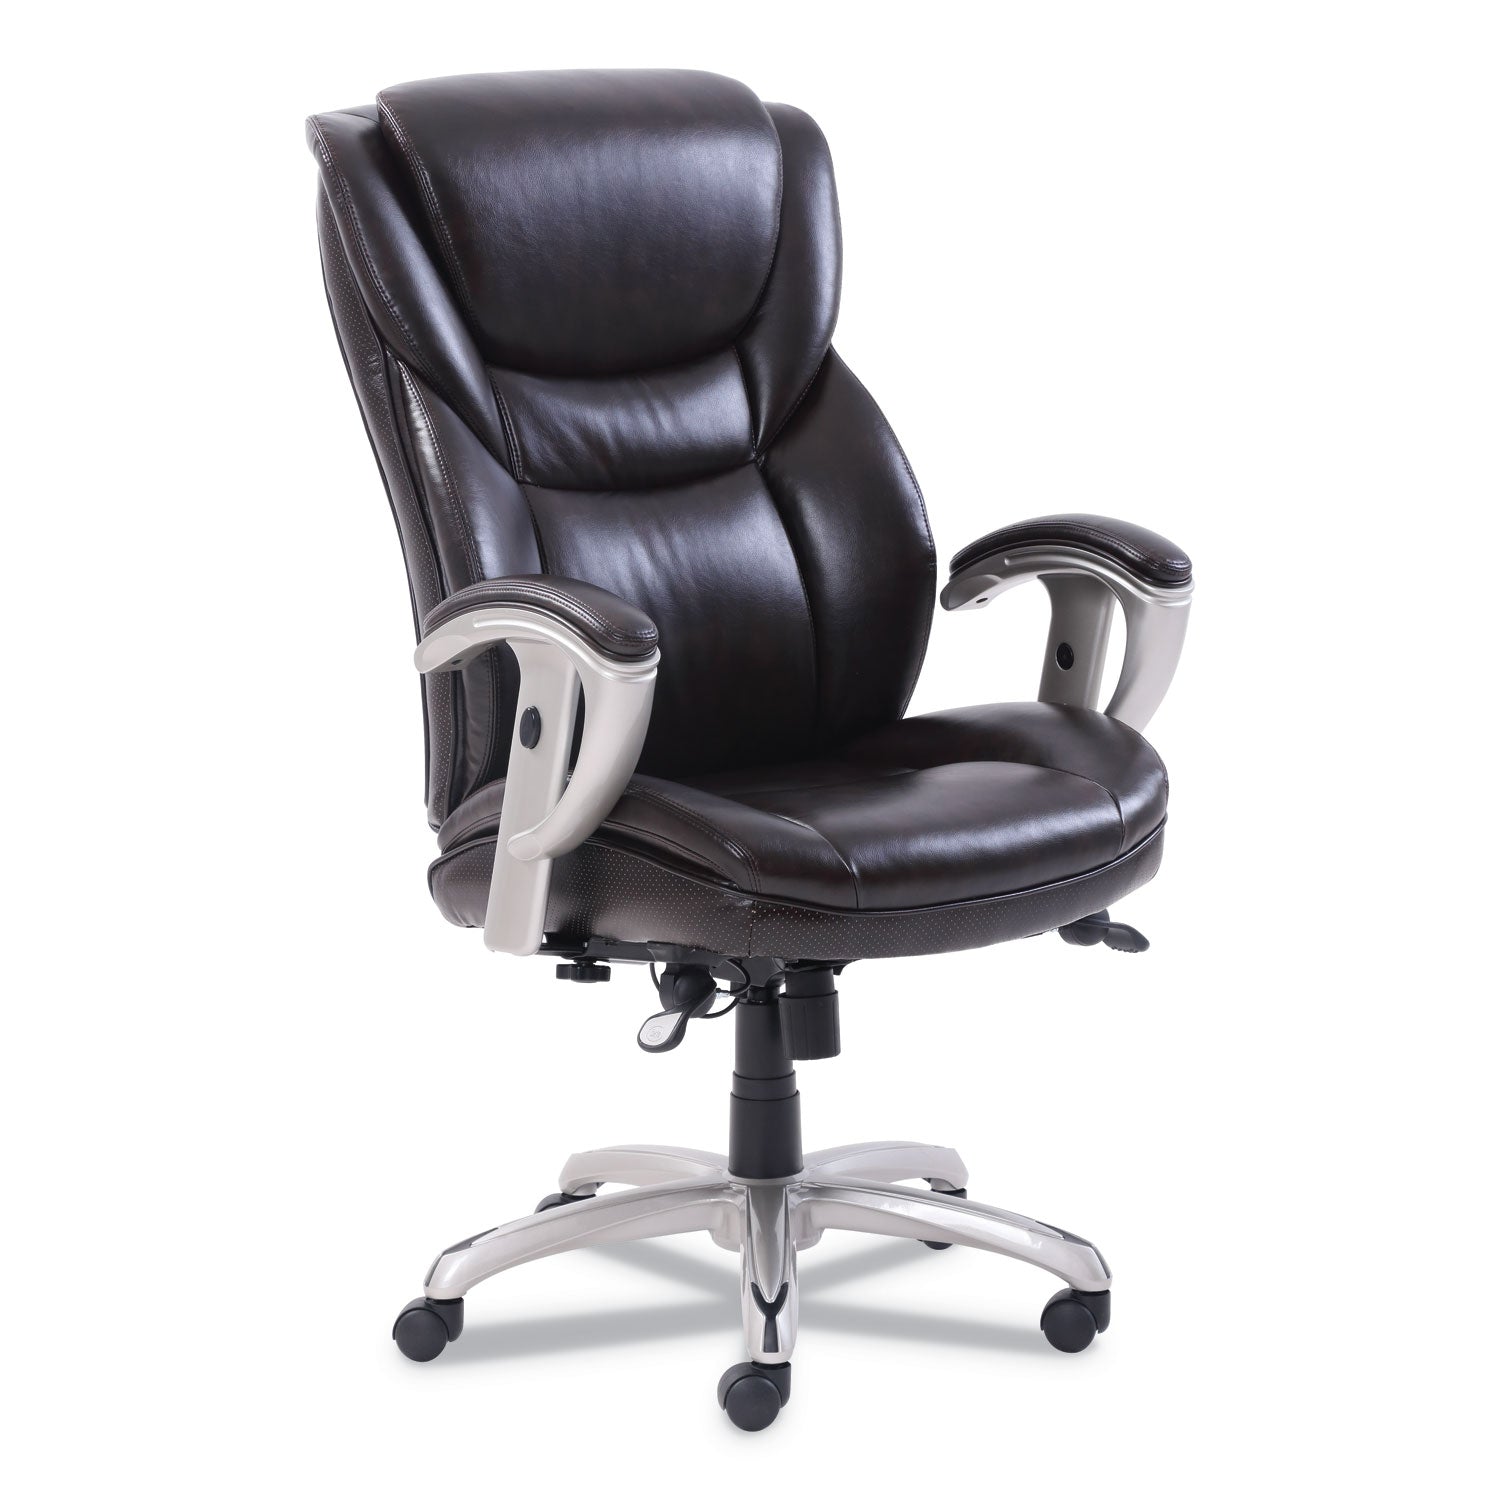 emerson-executive-task-chair-supports-up-to-300-lb-19-to-22-seat-height-brown-seat-back-silver-base_srj49710brw - 1